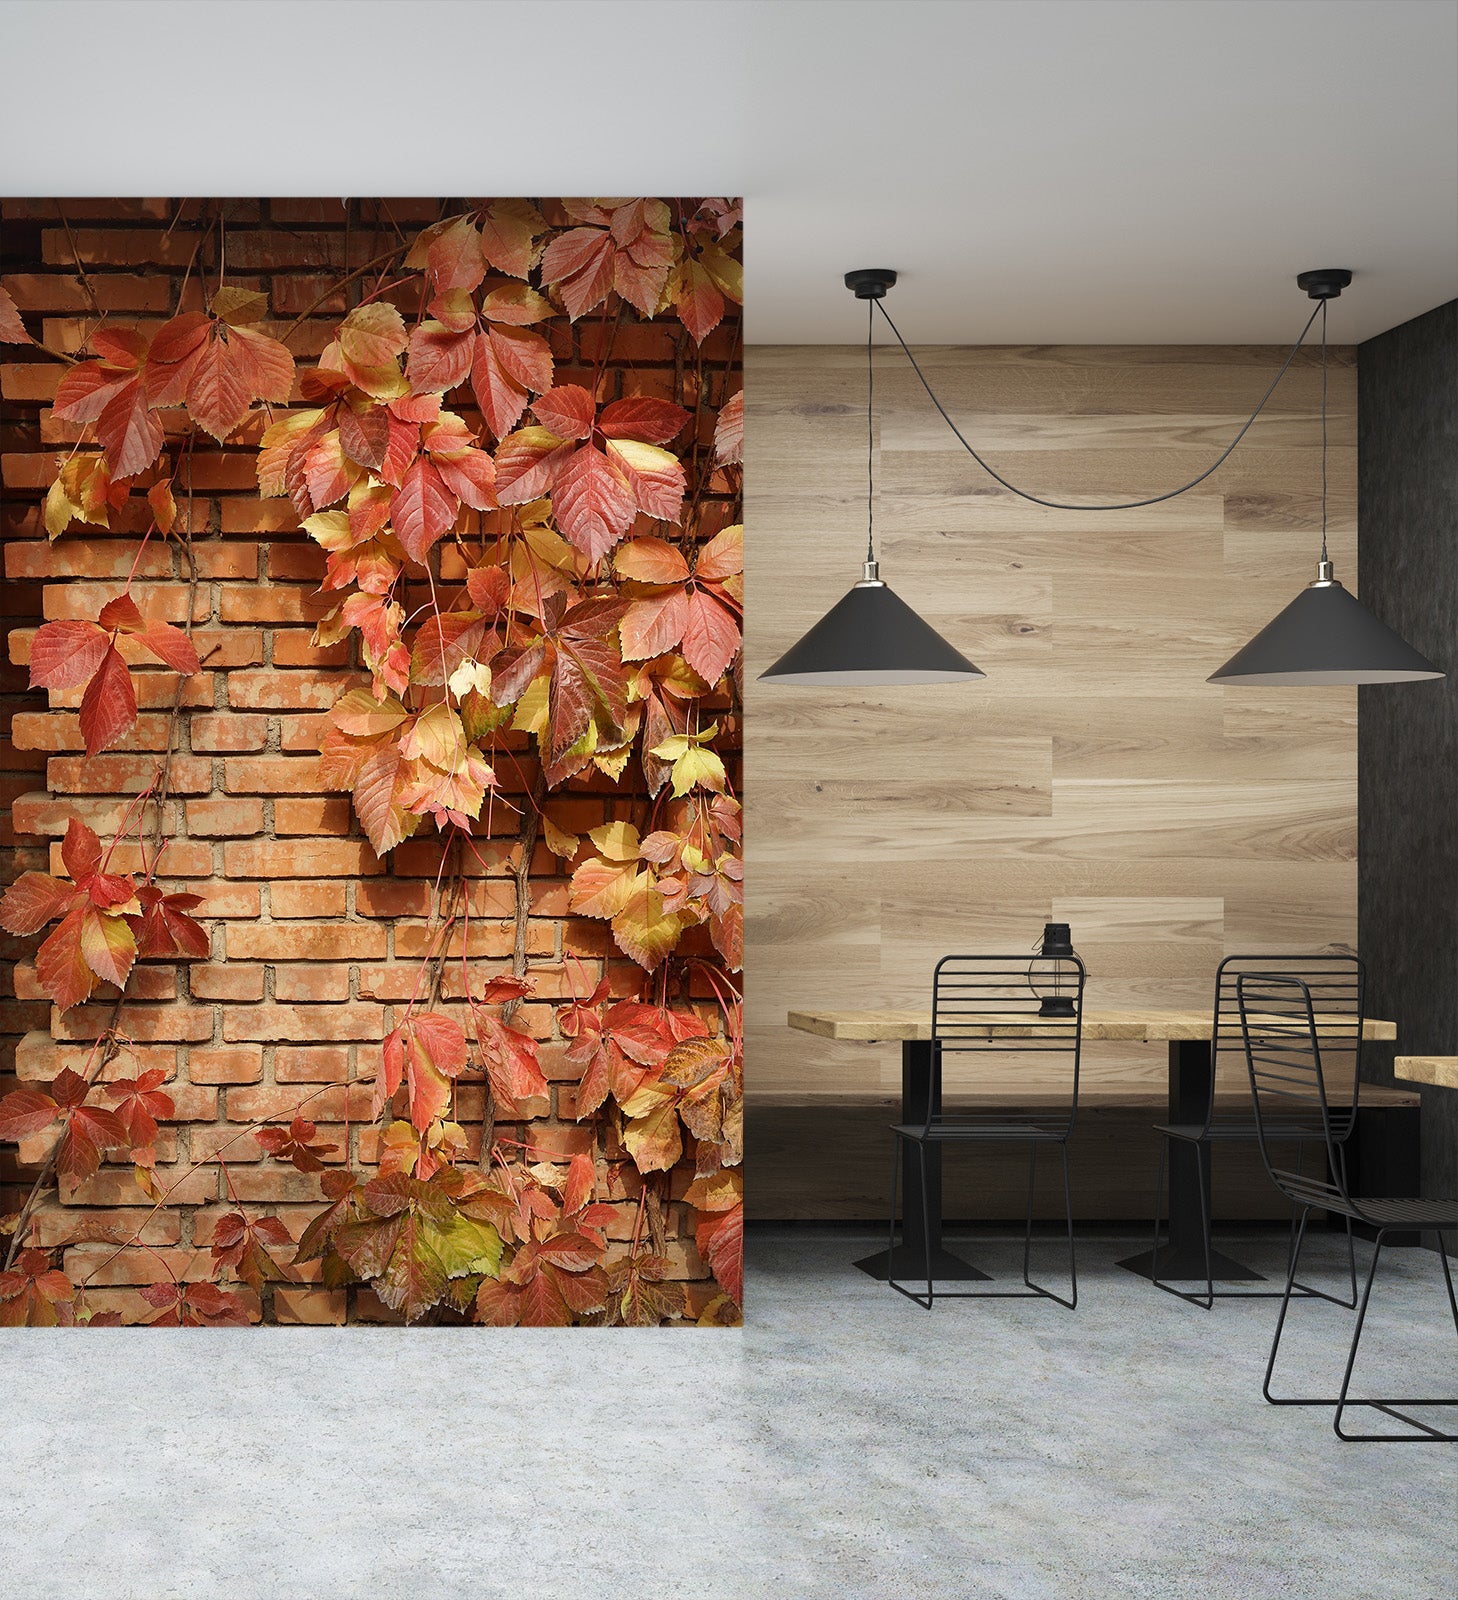 3D Red Maple Leaf 861 Wall Murals